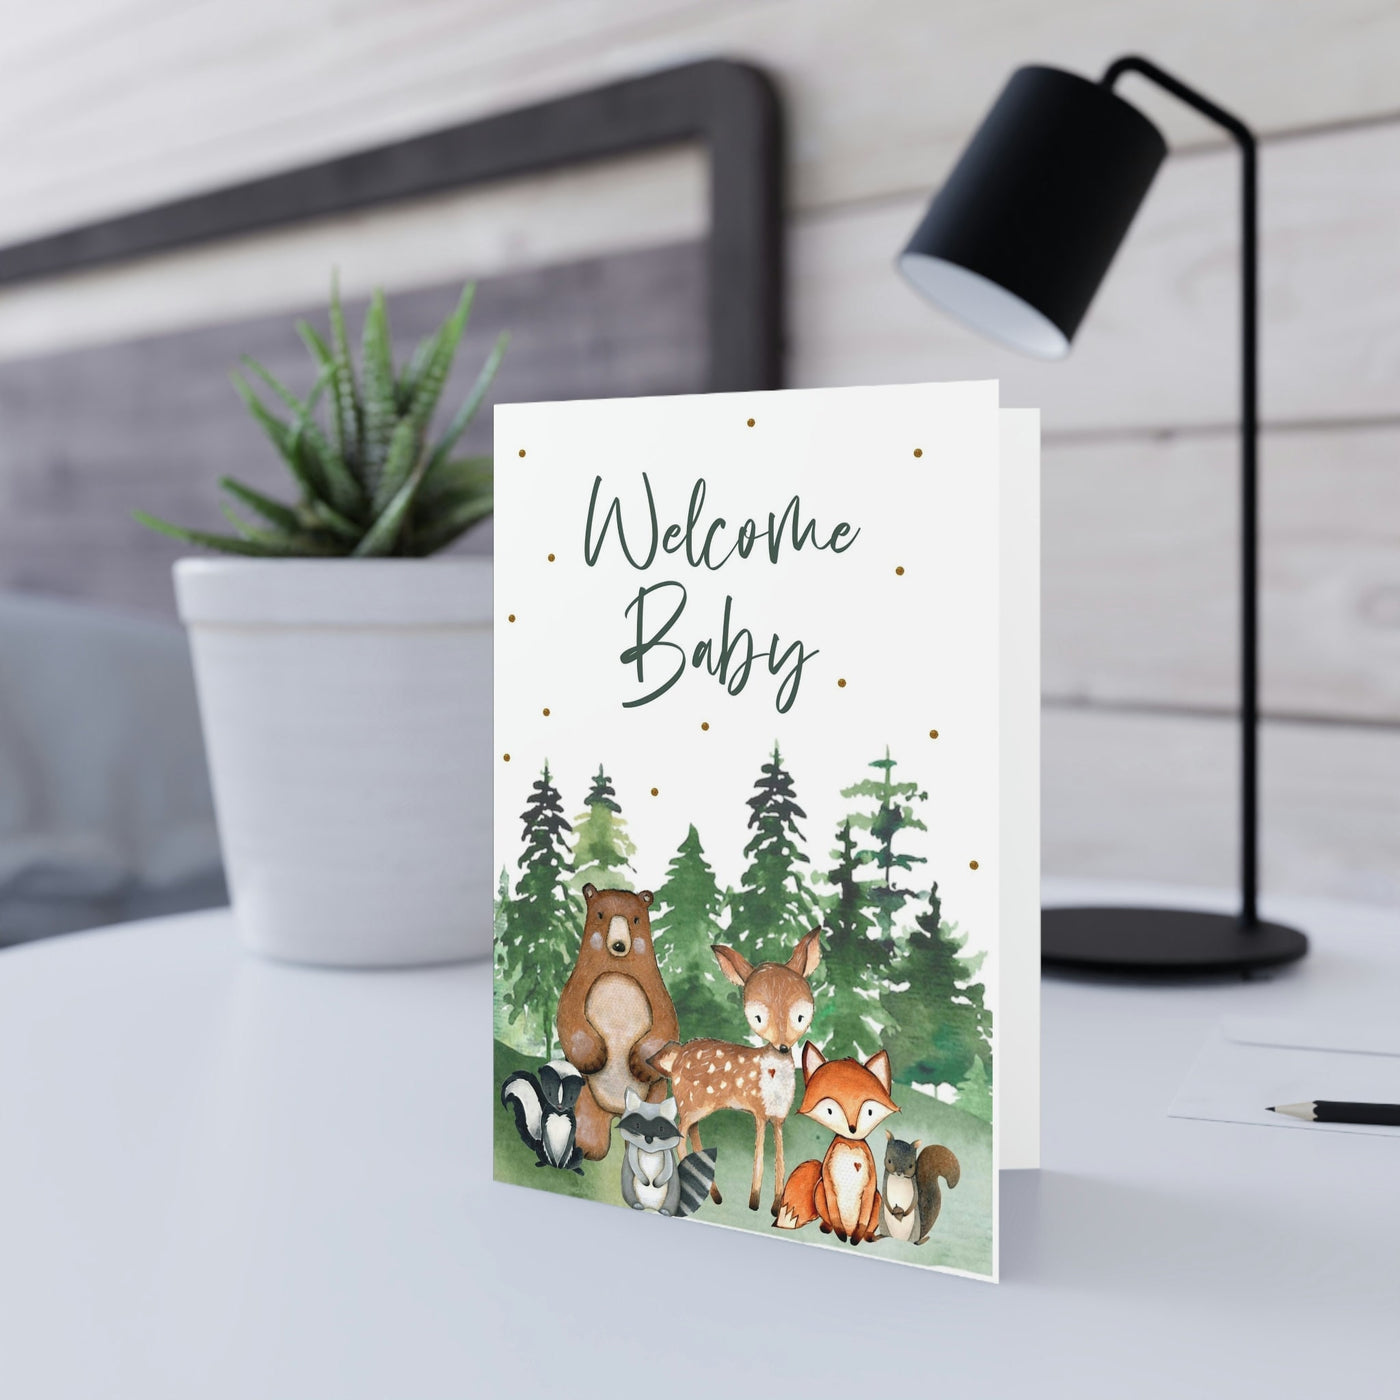 New Baby Card, Woodland Baby Card, Baby Shower Greeting Card, Woodland Baby Shower Personalized Card, Woodland New Baby Greeting, 5x7 Card